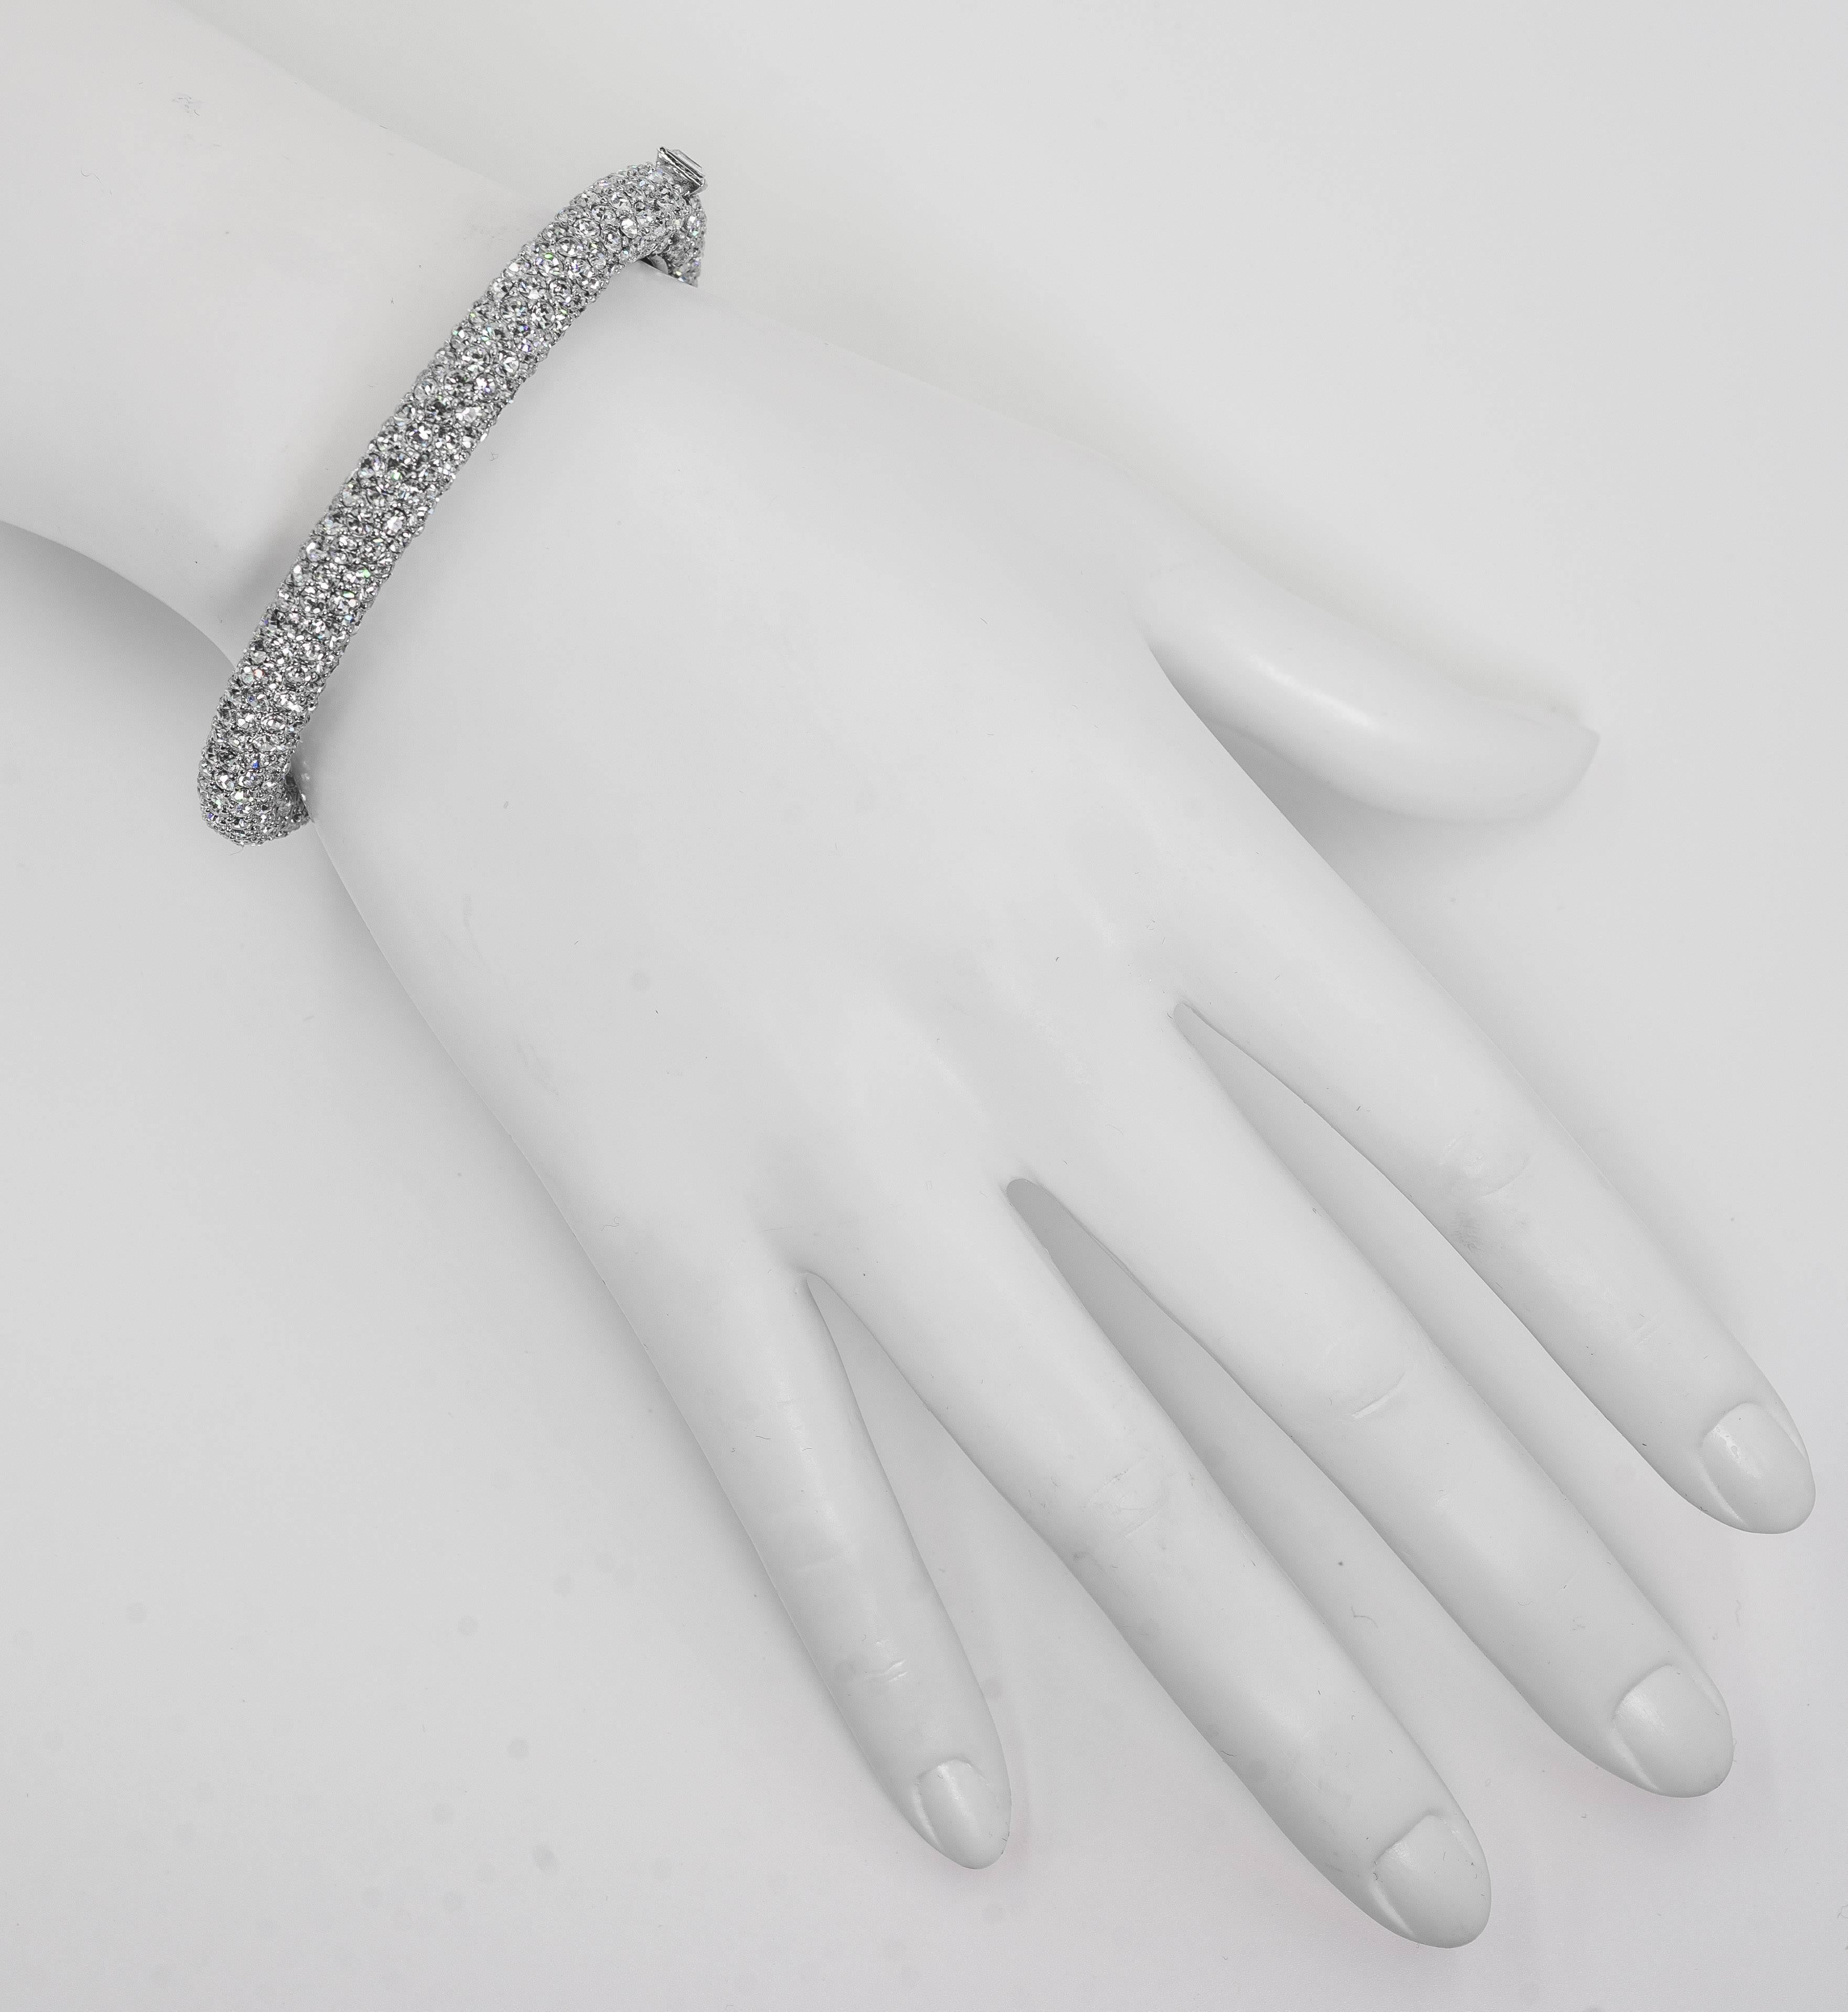 Vintage exclusive for Bergdorf Goodman mint pave Swarovski crystal clasped bangle made for a single exclusive collection in 1994 featured in WWD. Pave all around, thickness of bangle 1/4'' inch and fits up to a 7''wrist. Open and closes, 
secure